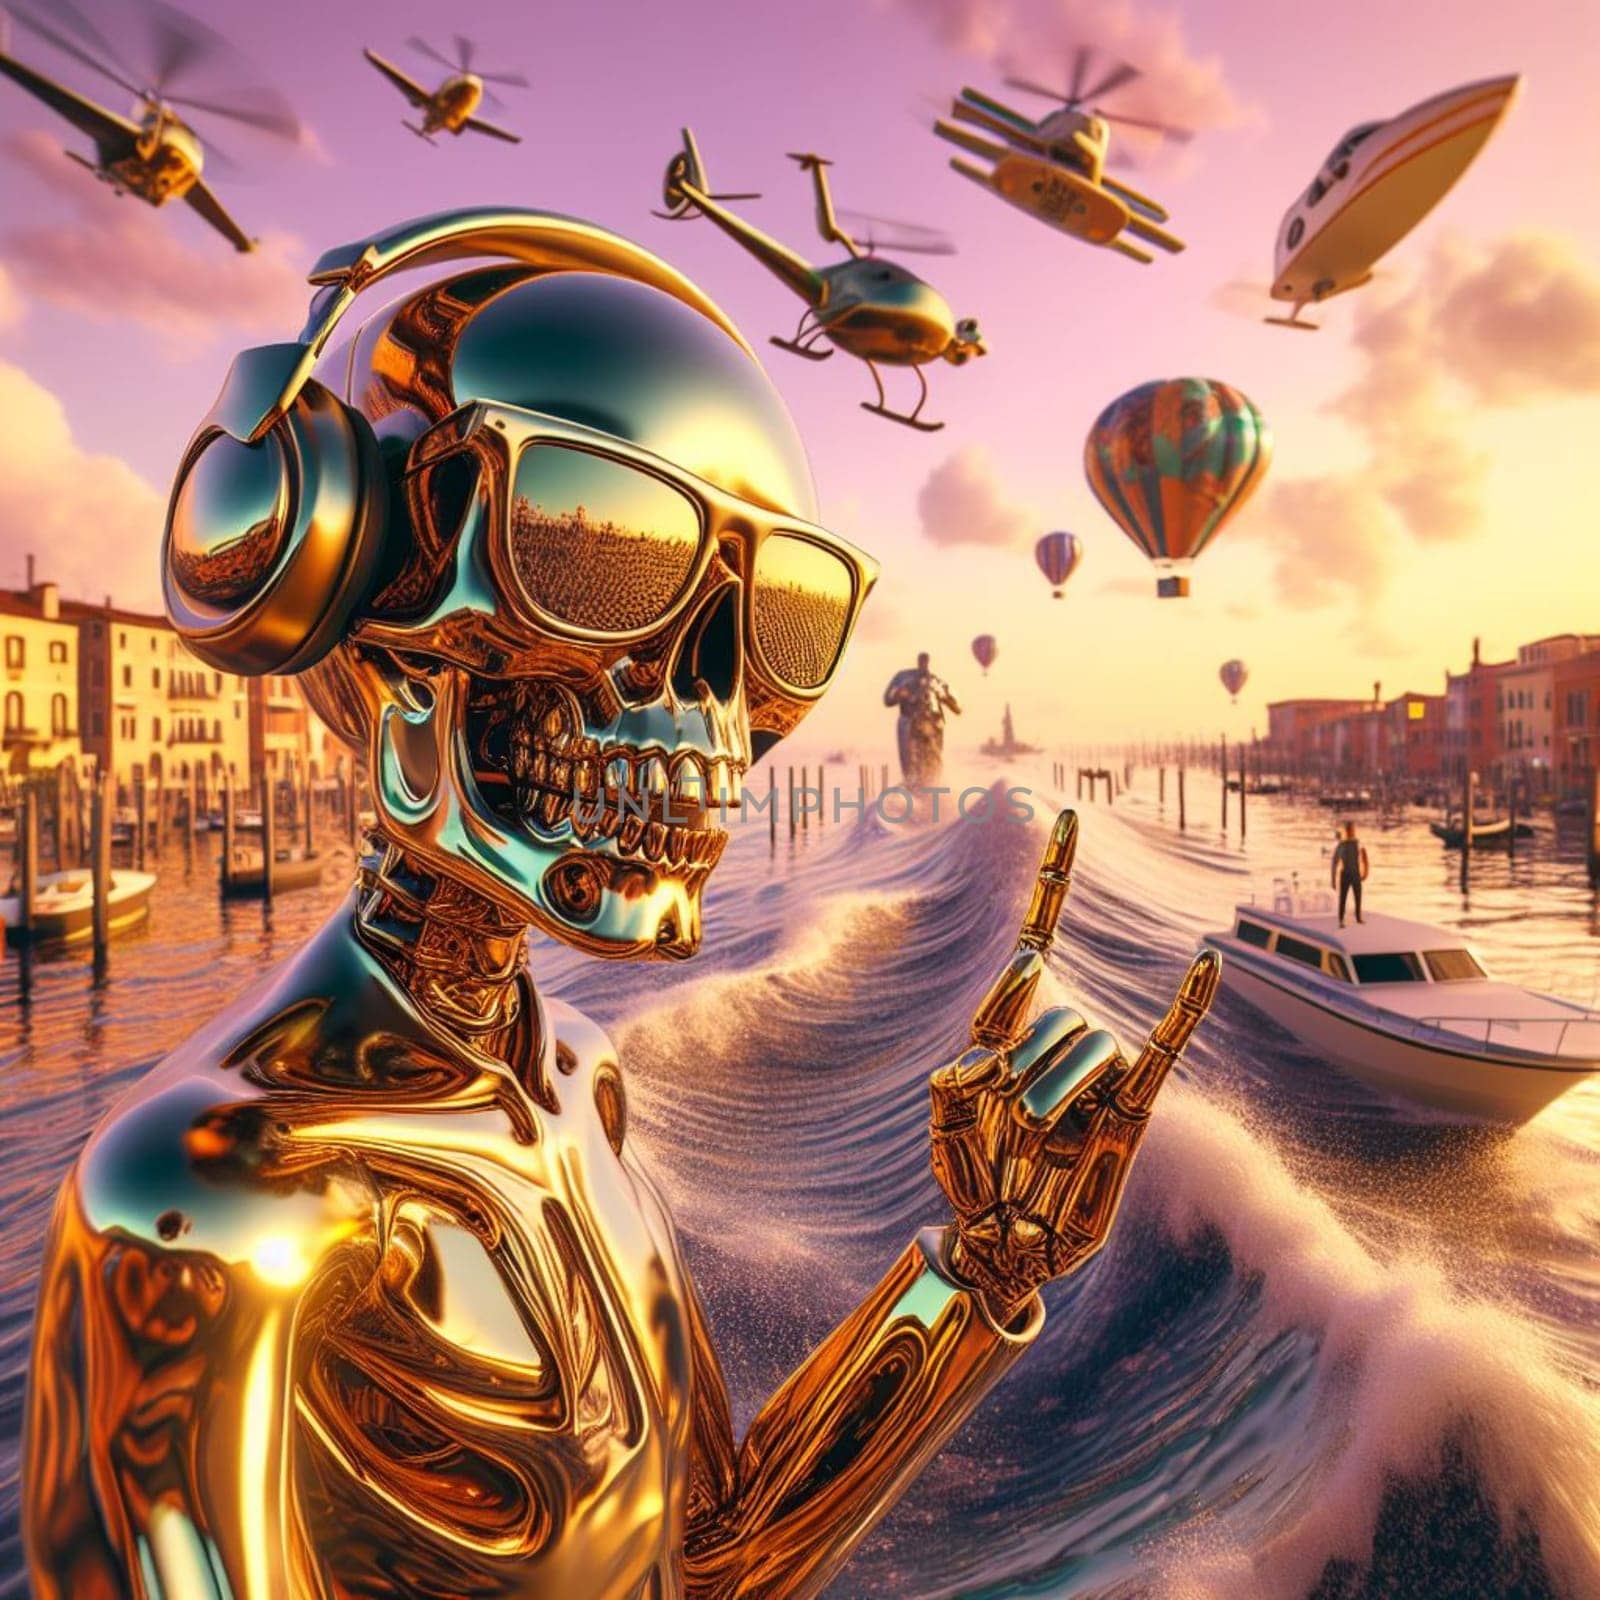 metallic mistical alien in dj set playing music in a crowded beach party in tropical island at sunset by verbano